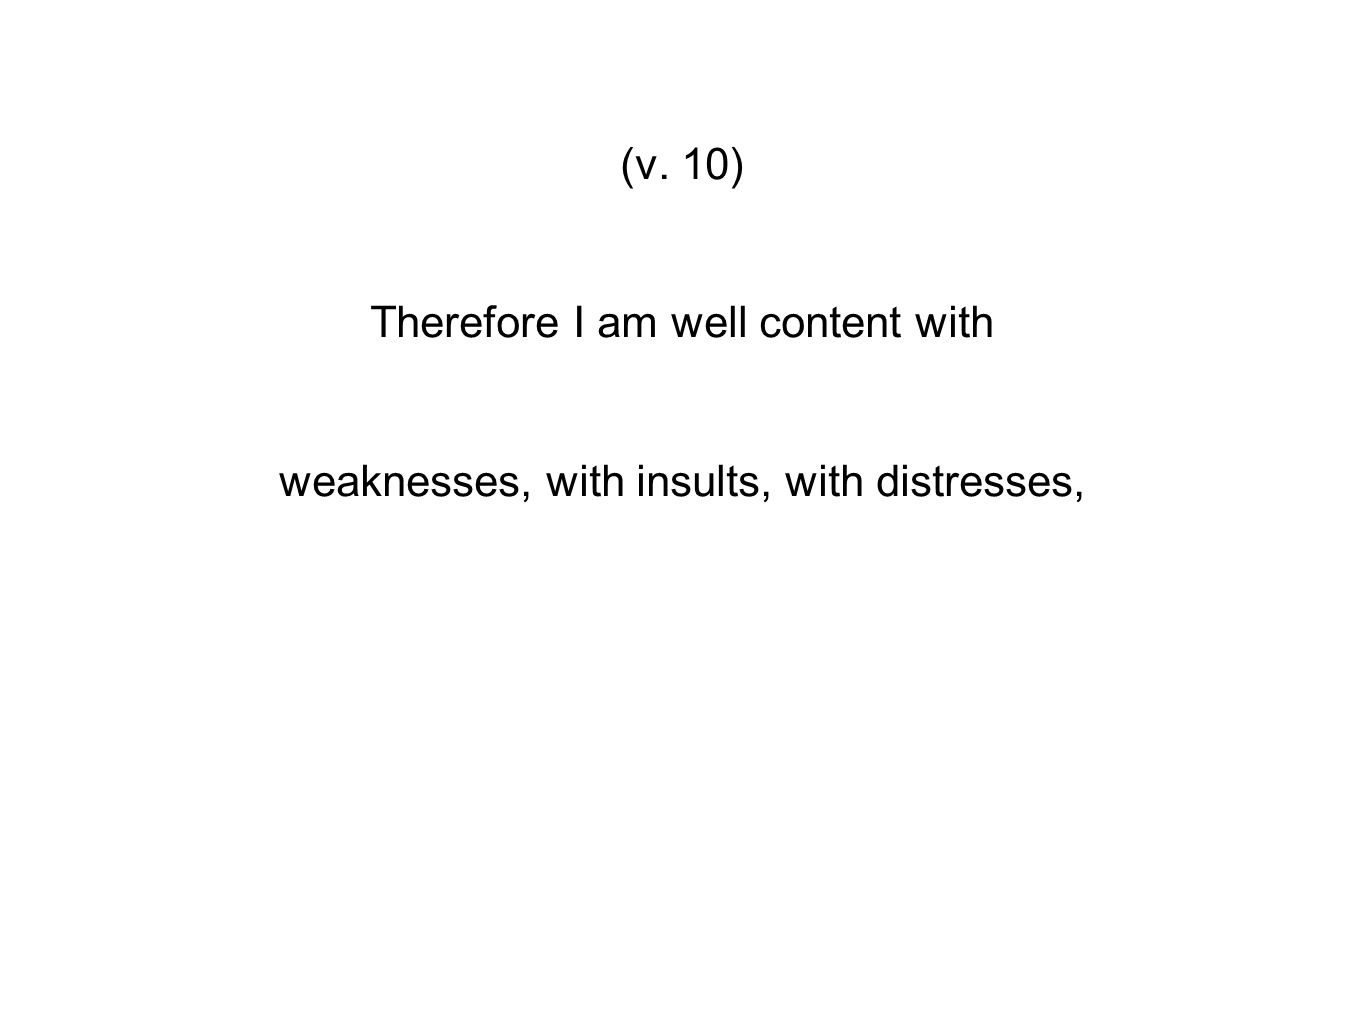 (v. 10) Therefore I am well content with weaknesses, with insults, with distresses,